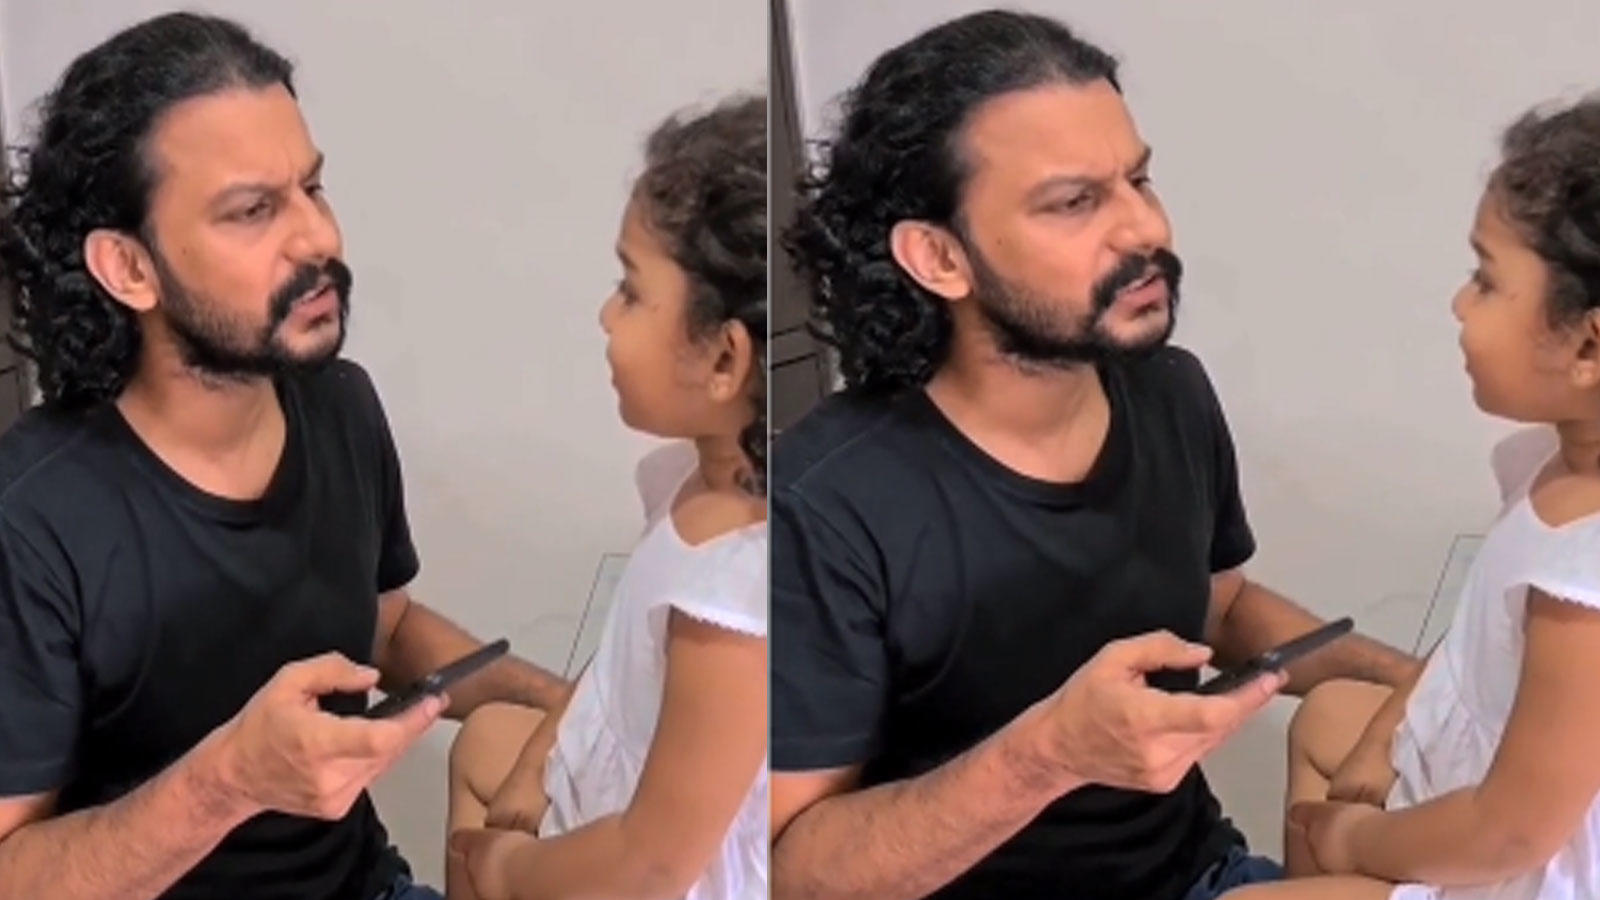 Adinath Kothare Shares An Adorable Video Of Having Fun With His Daughter Tv Times Of India Videos Watch.actress in marathi urmila kothare workout with daughter jizah kothare. adinath kothare shares an adorable video of having fun with his daughter